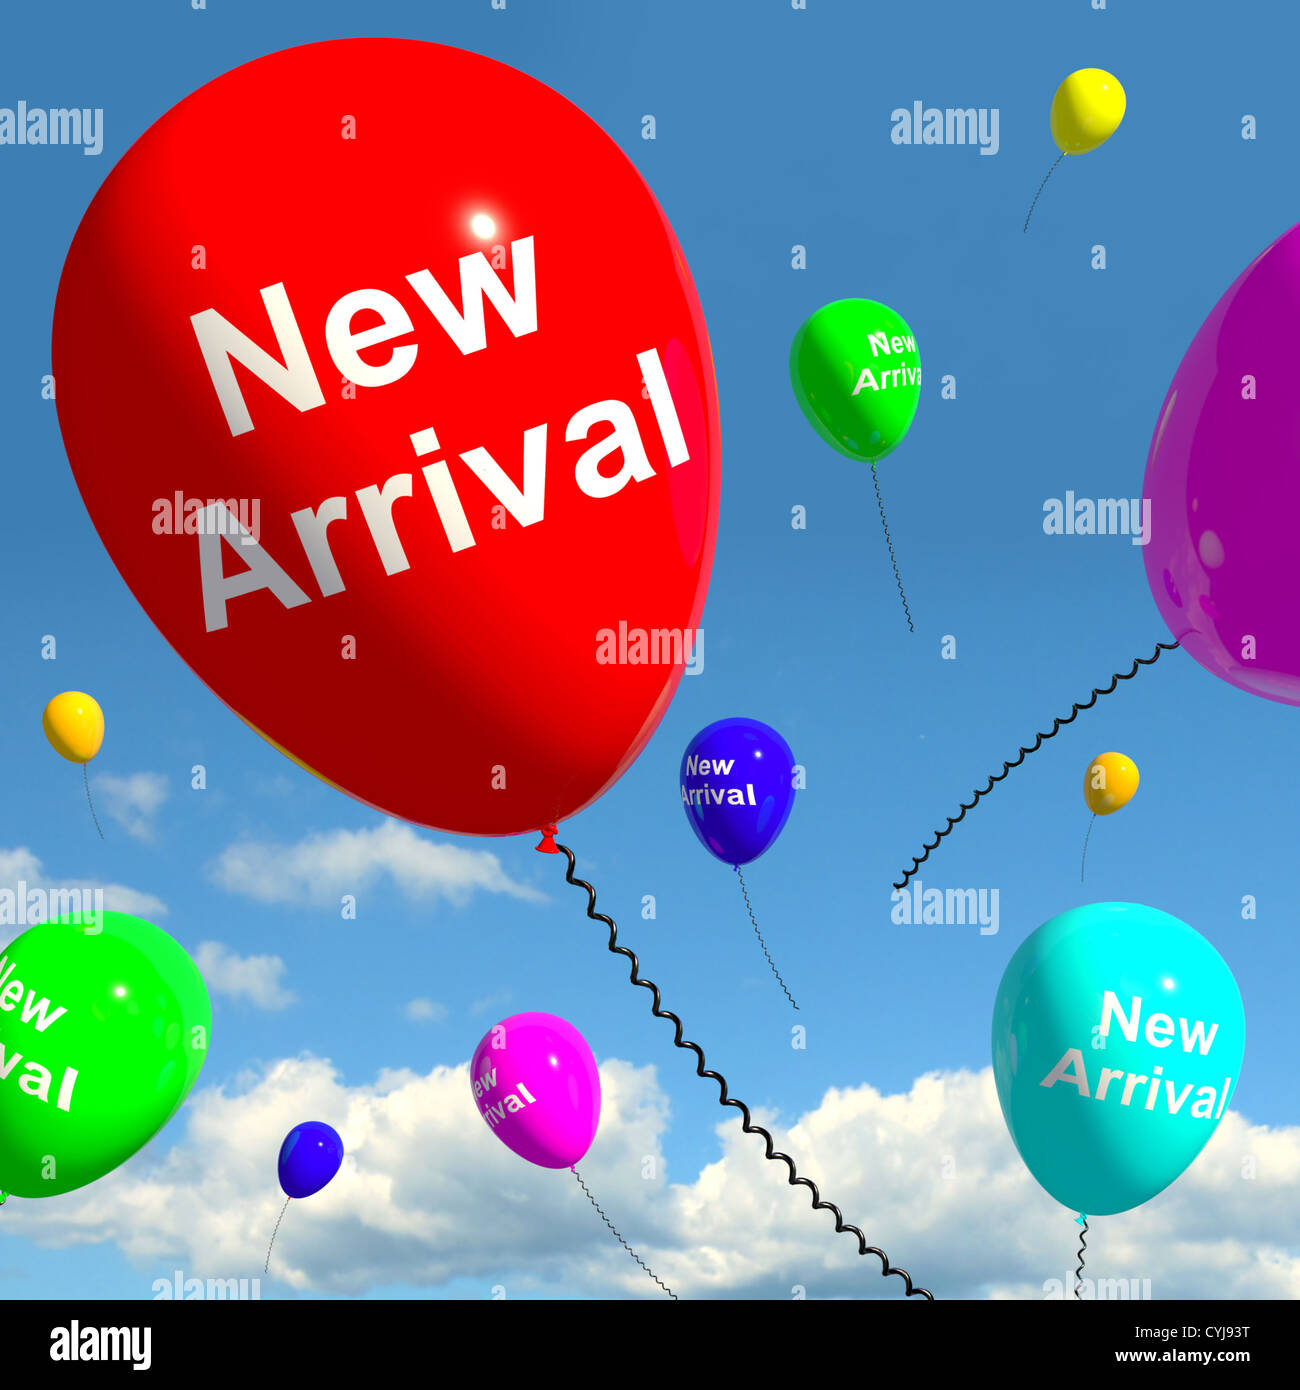 New Arrival Balloons In The Sky Shows Latest Product Online Or New Baby Stock Photo